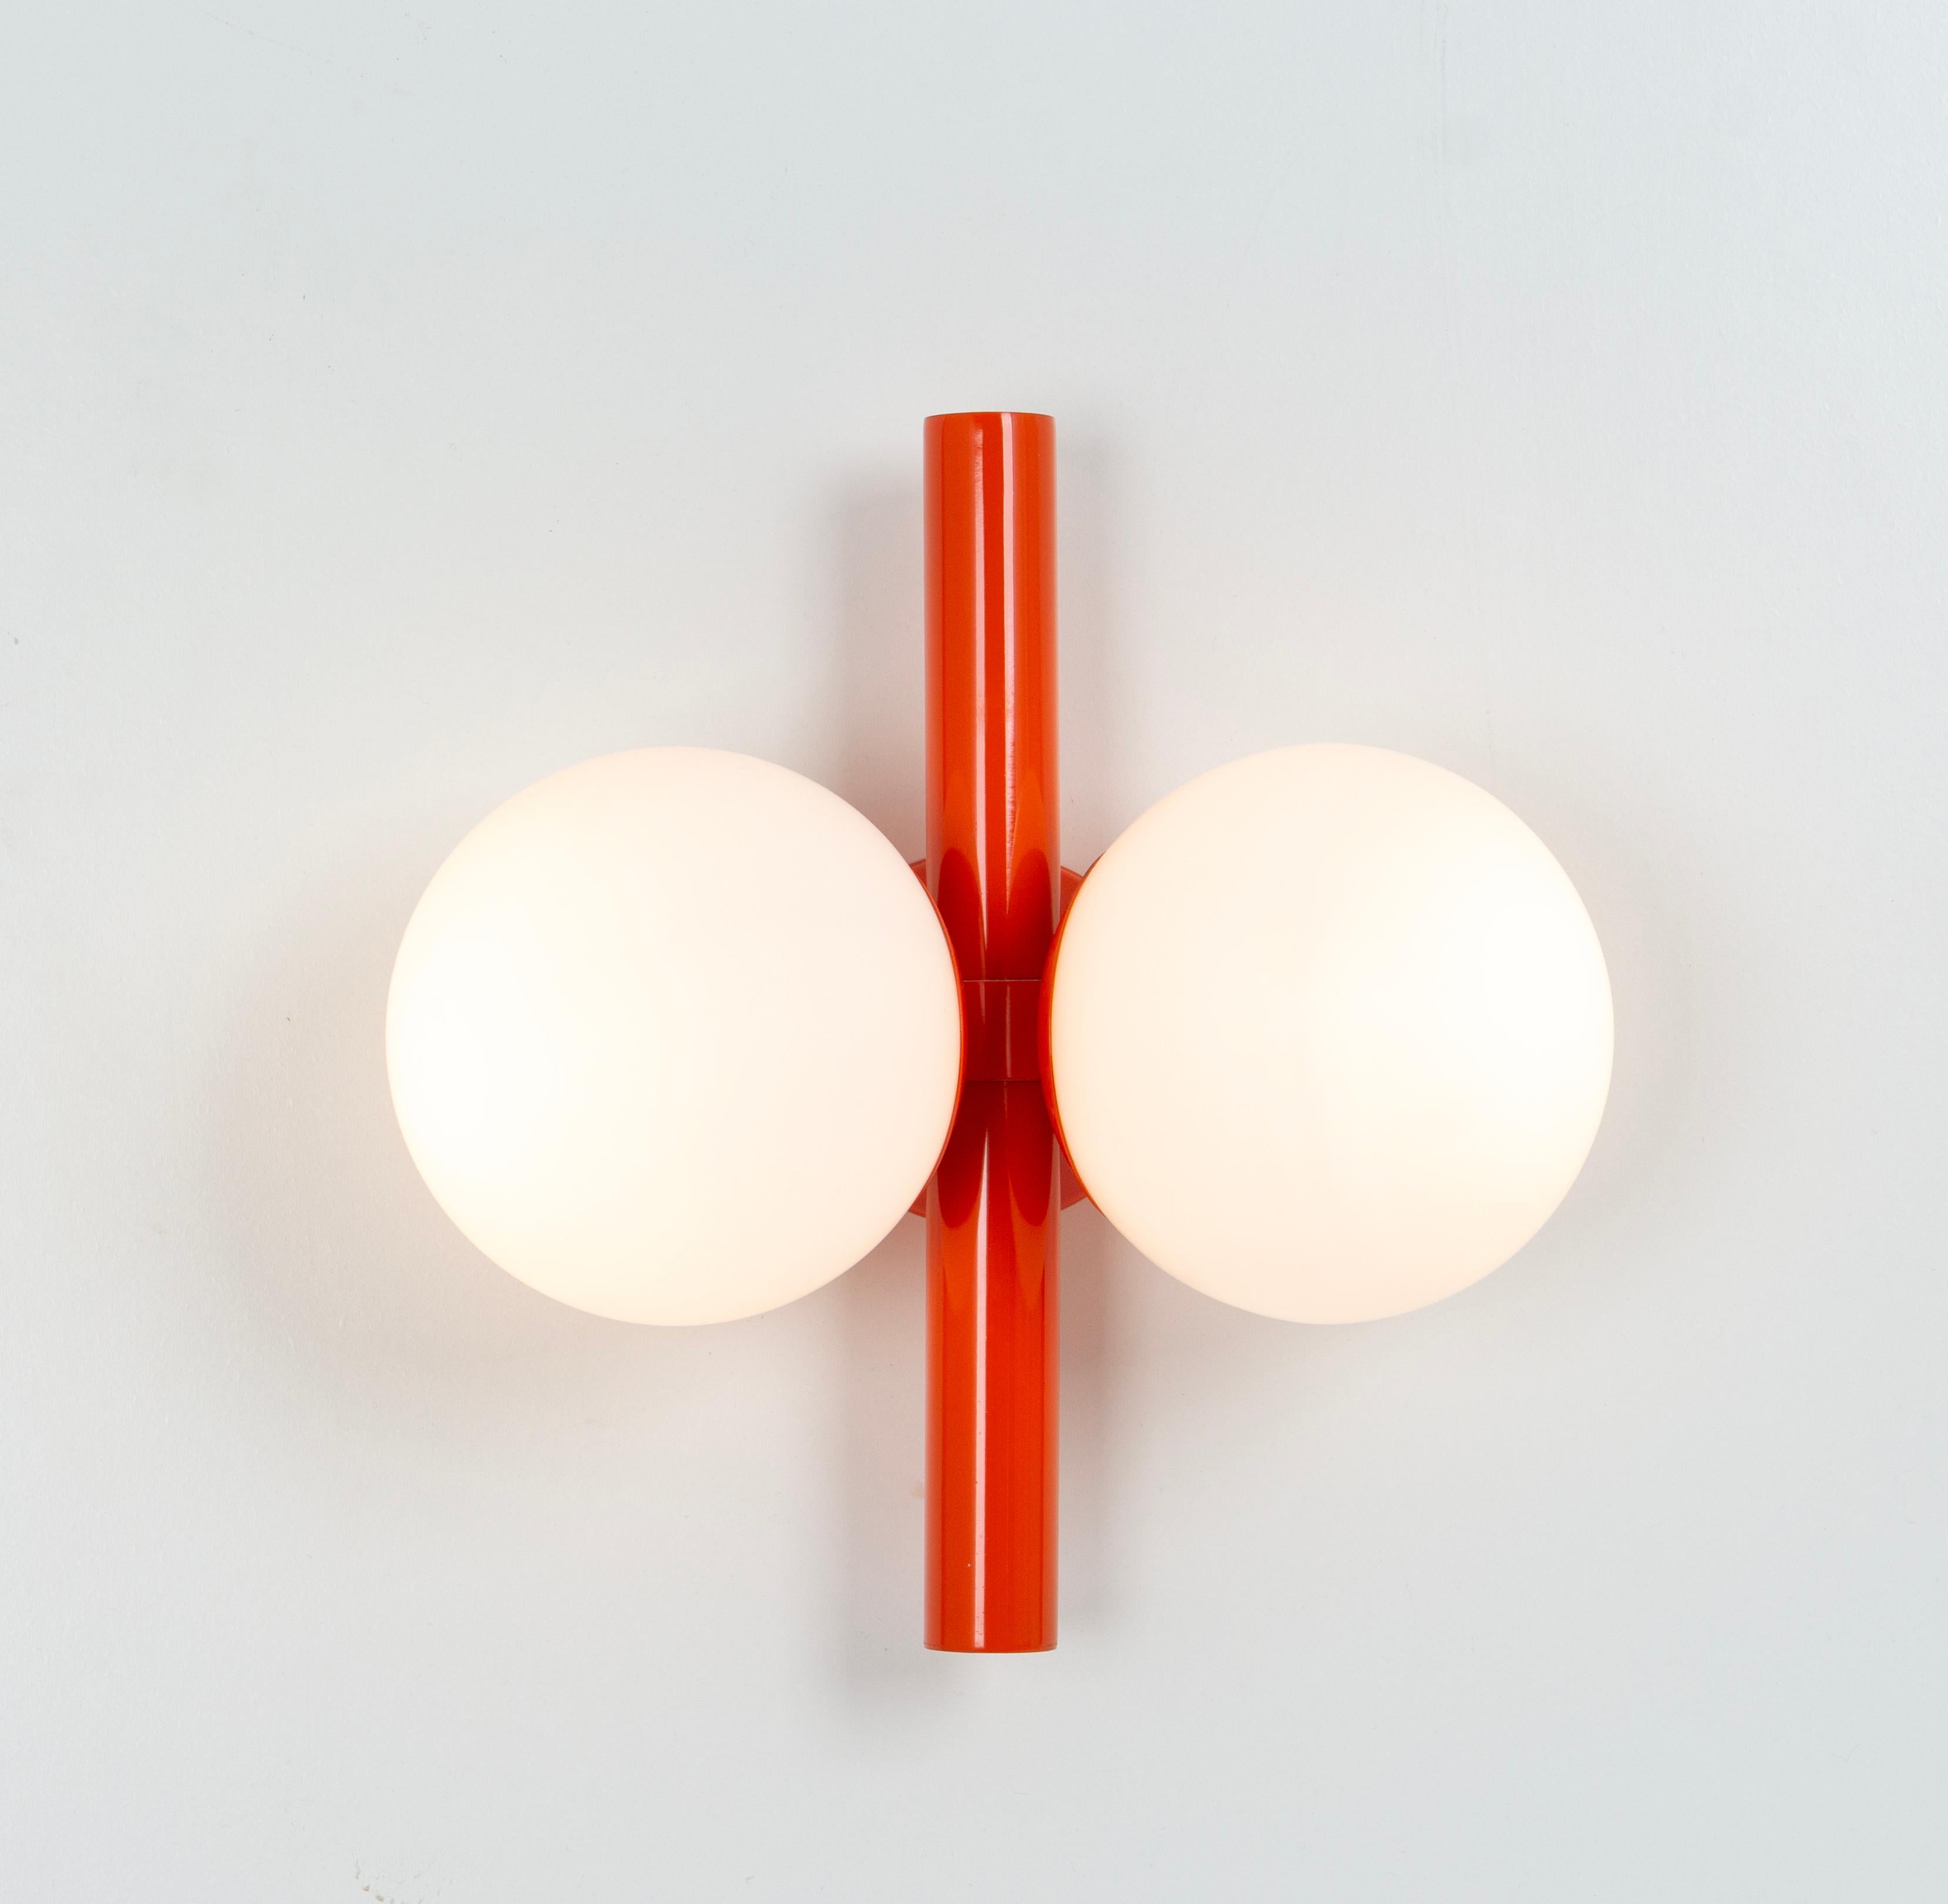 1 of 3 Midcentury Orbital Wall lights in Orange by Kaiser, Germany, 1970s For Sale 3